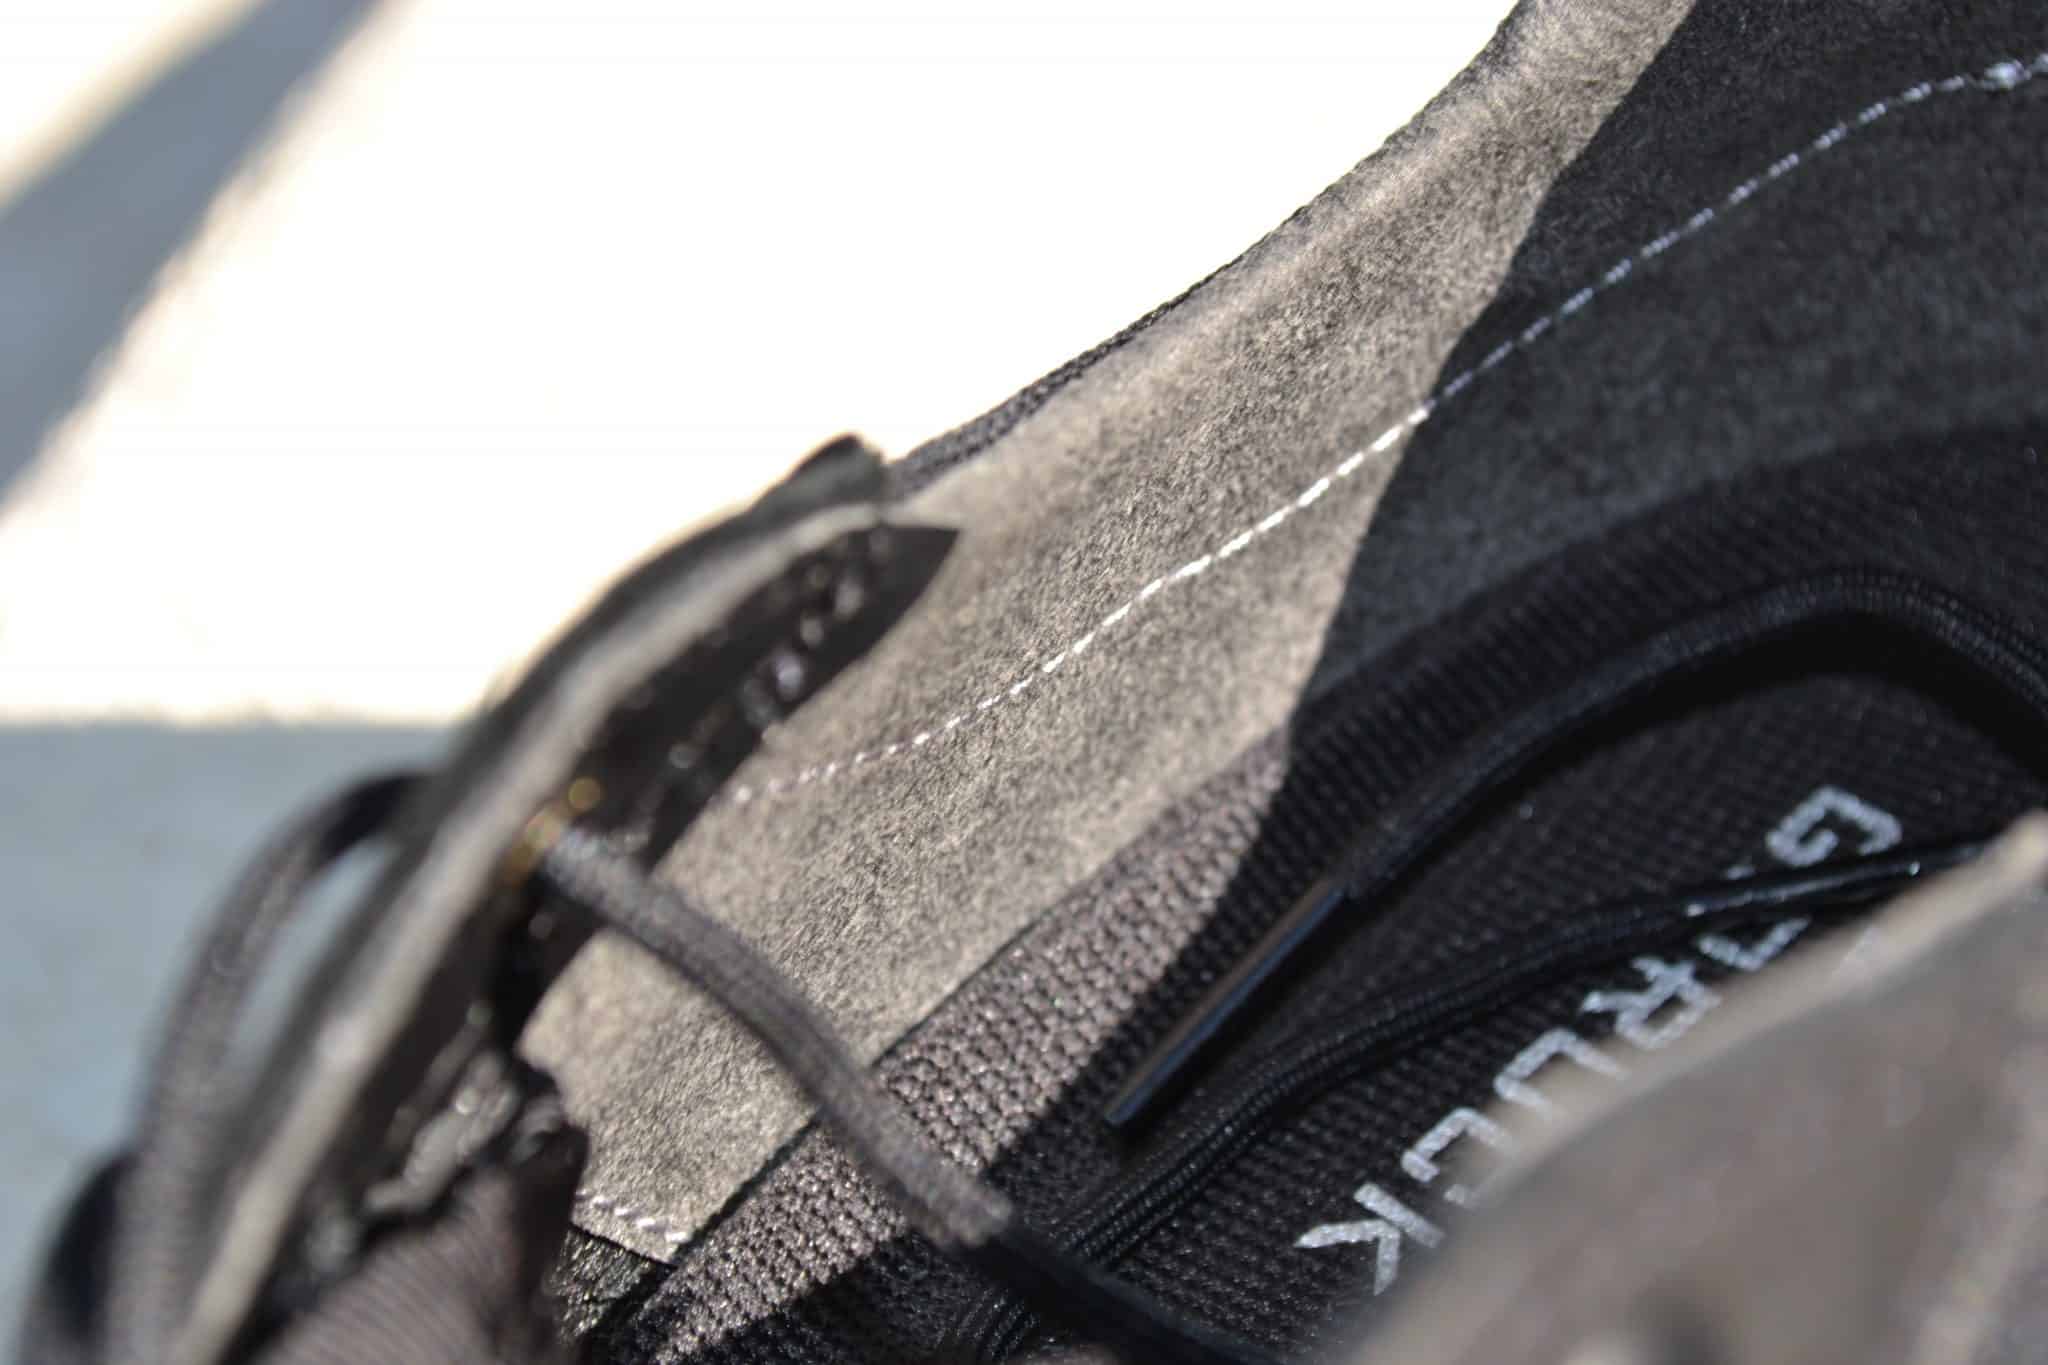 GORUCK I/O Cross Trainers - Training Shoe Review - Fit at Midlife